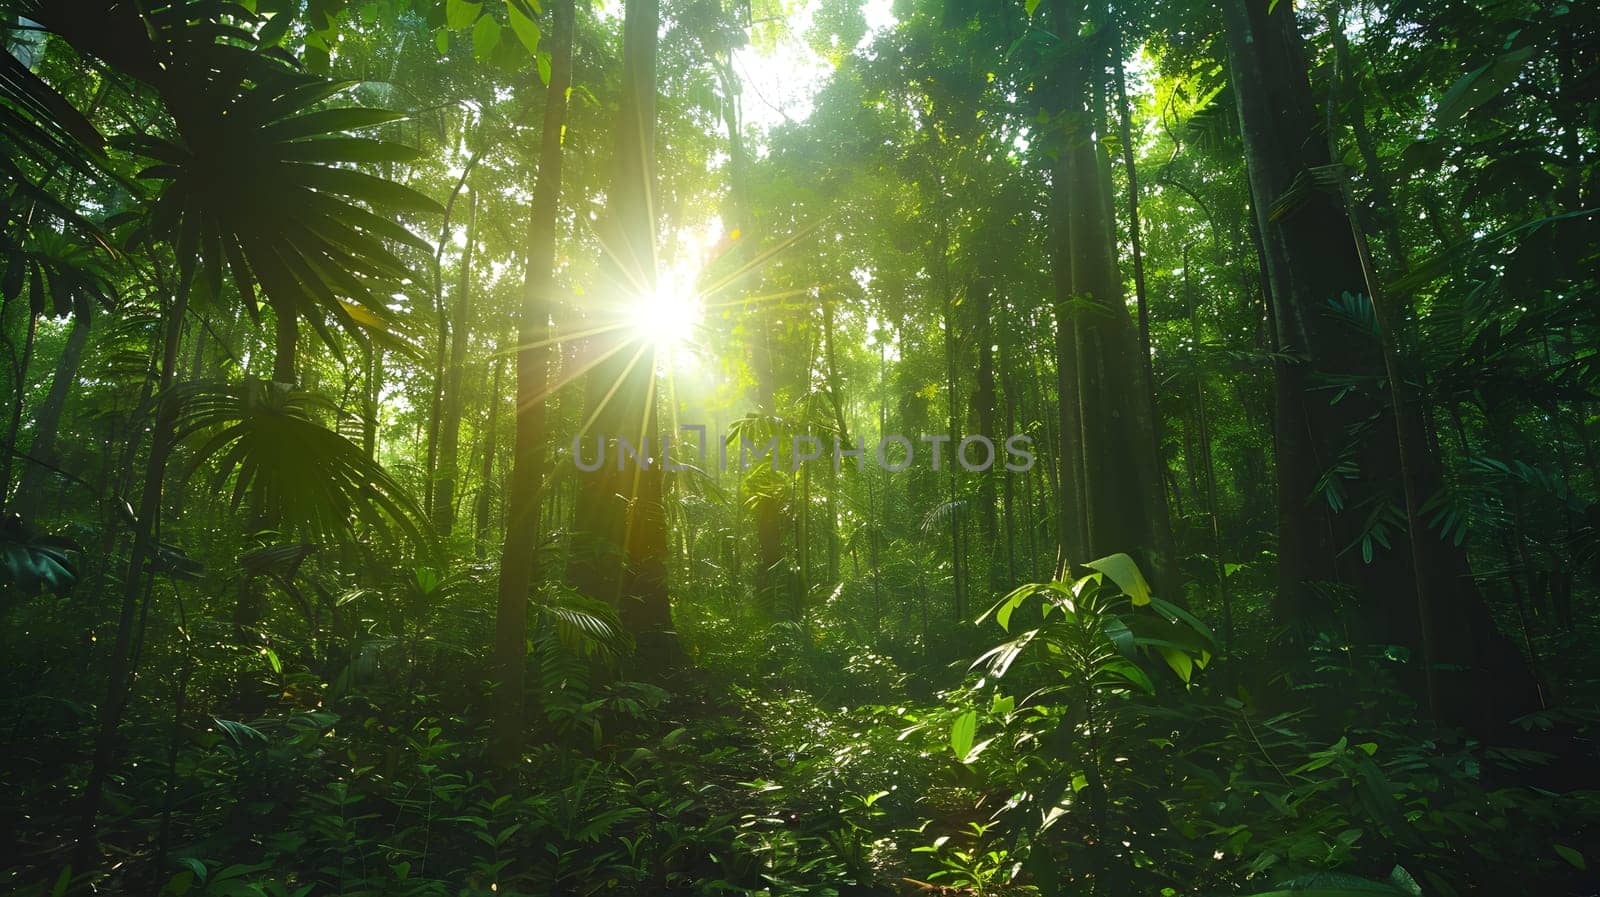 The sunlight filters through the dense foliage of trees in the jungle, illuminating the lush terrestrial plants and creating a beautiful natural landscape